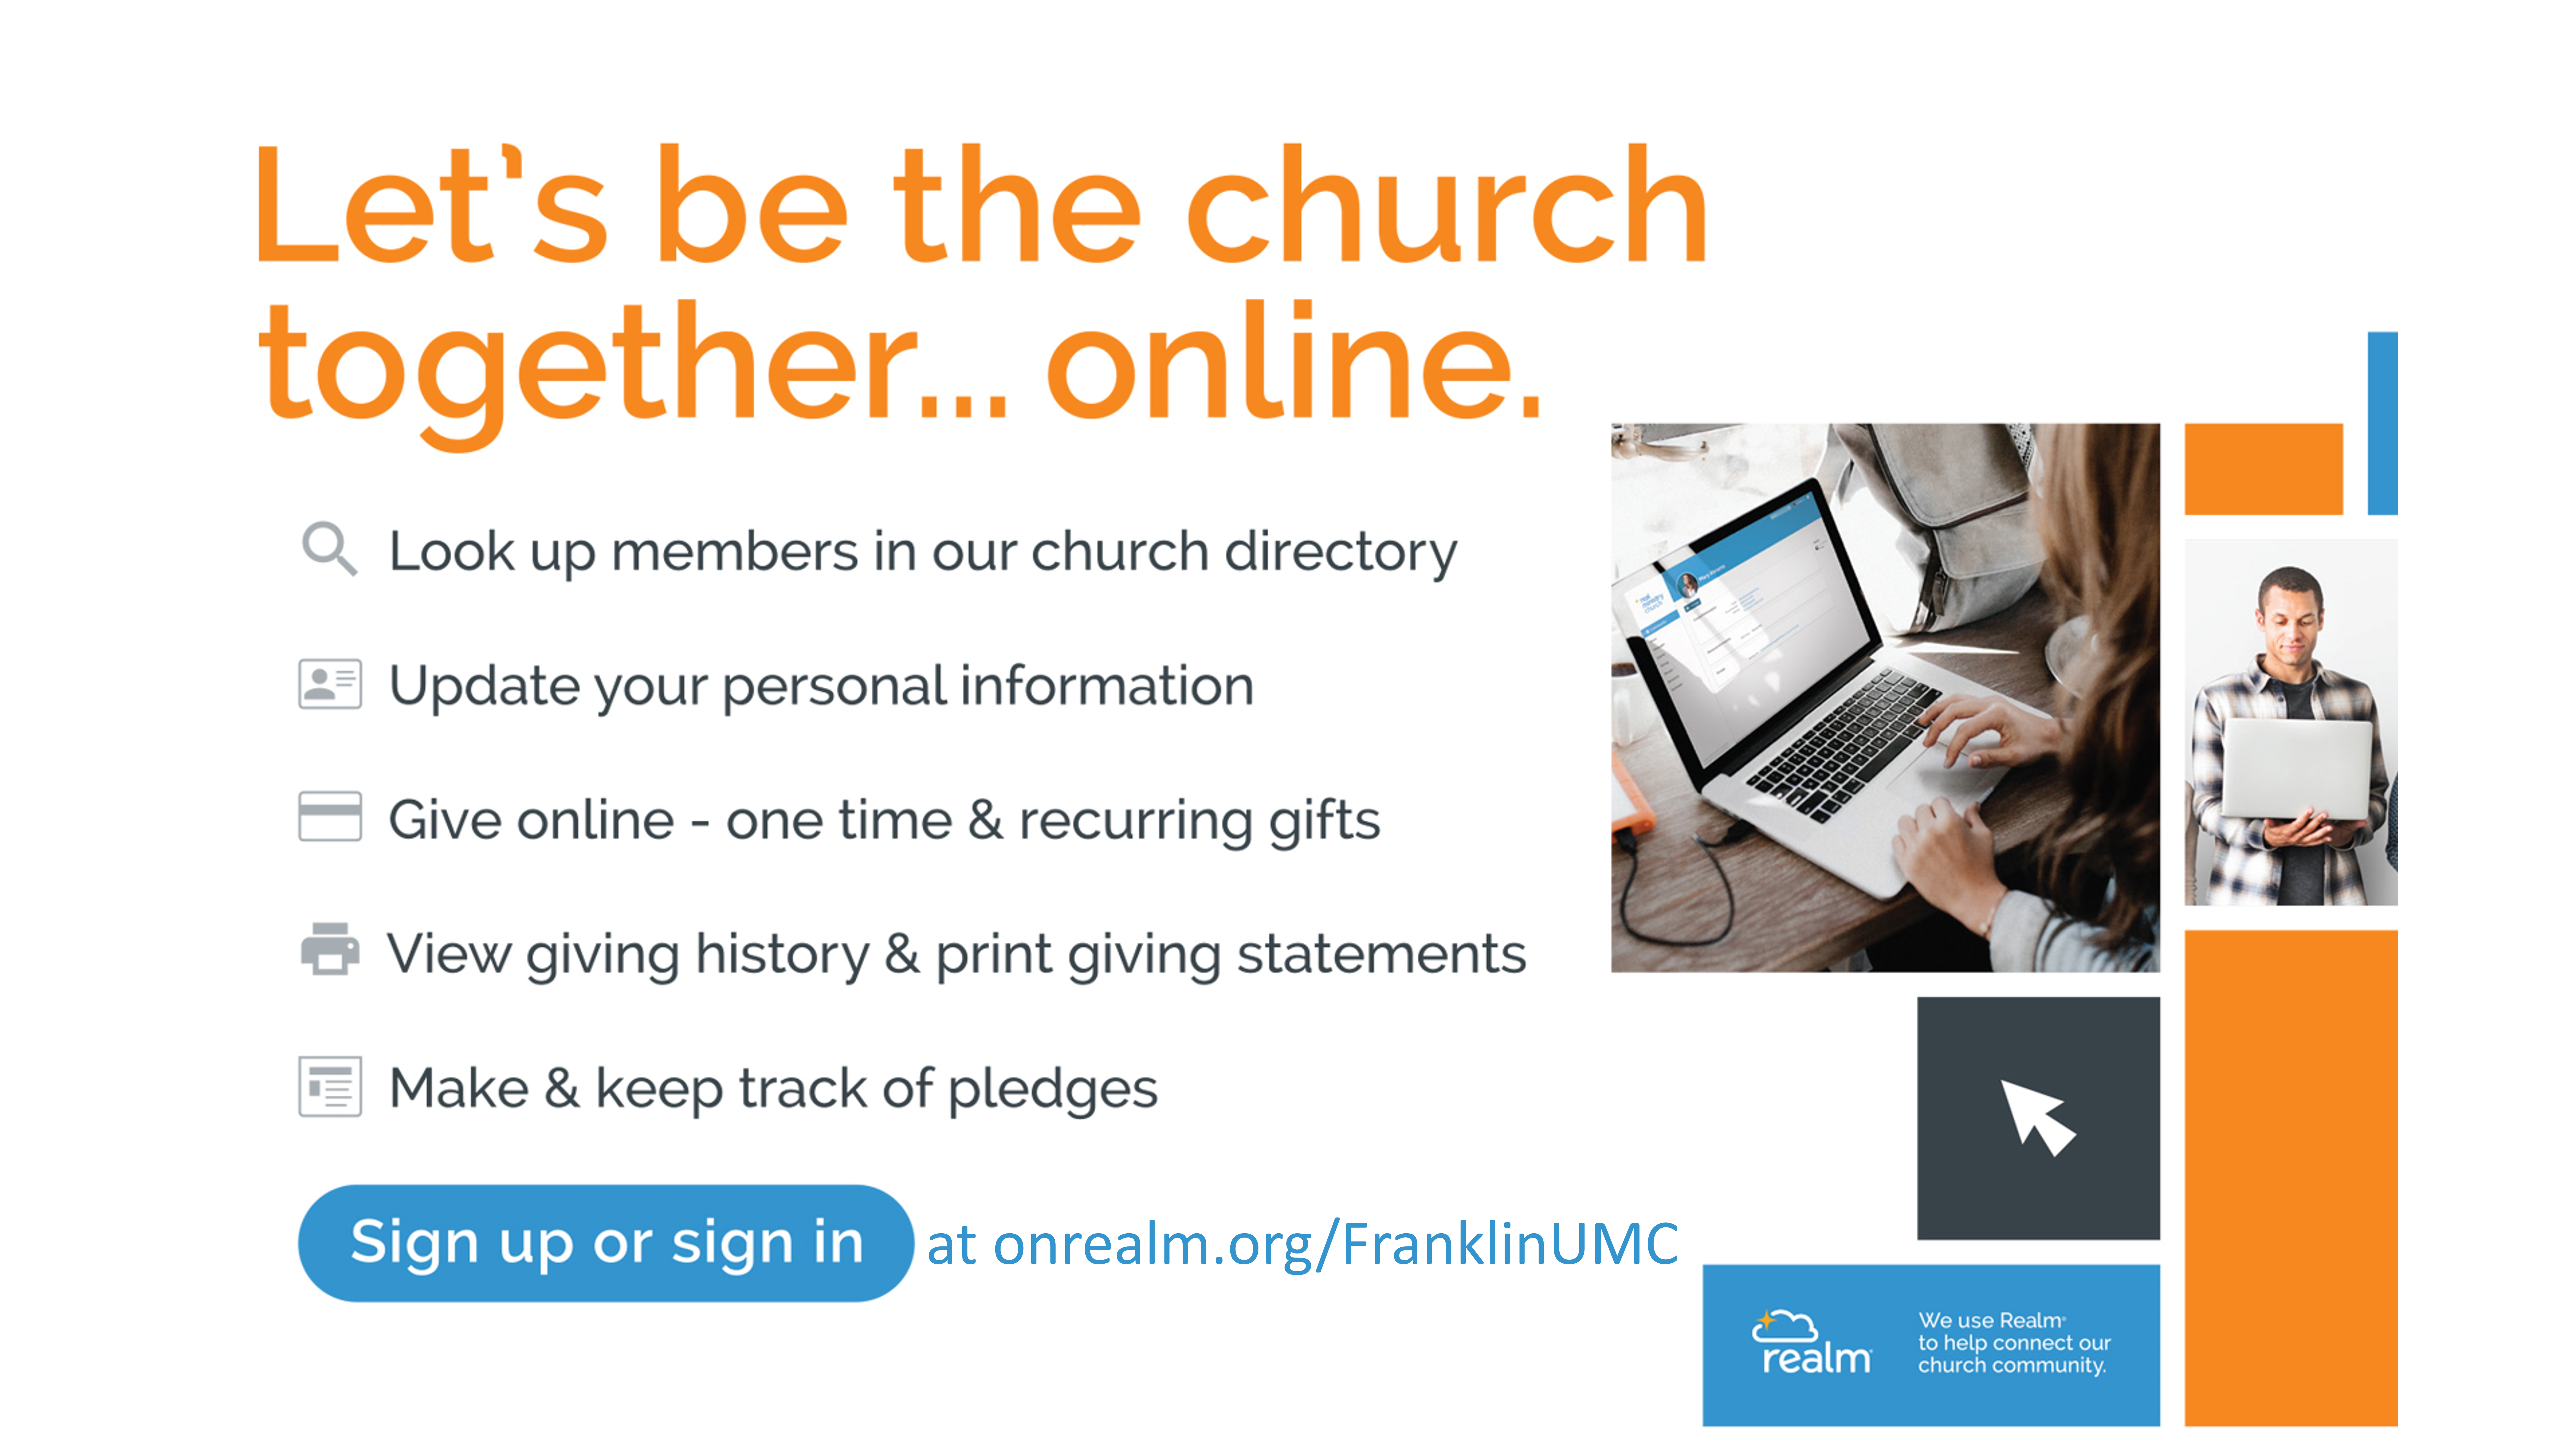 Let's be the church together...online. Sign up or sign in at onrealm.org/FranklinUMC.